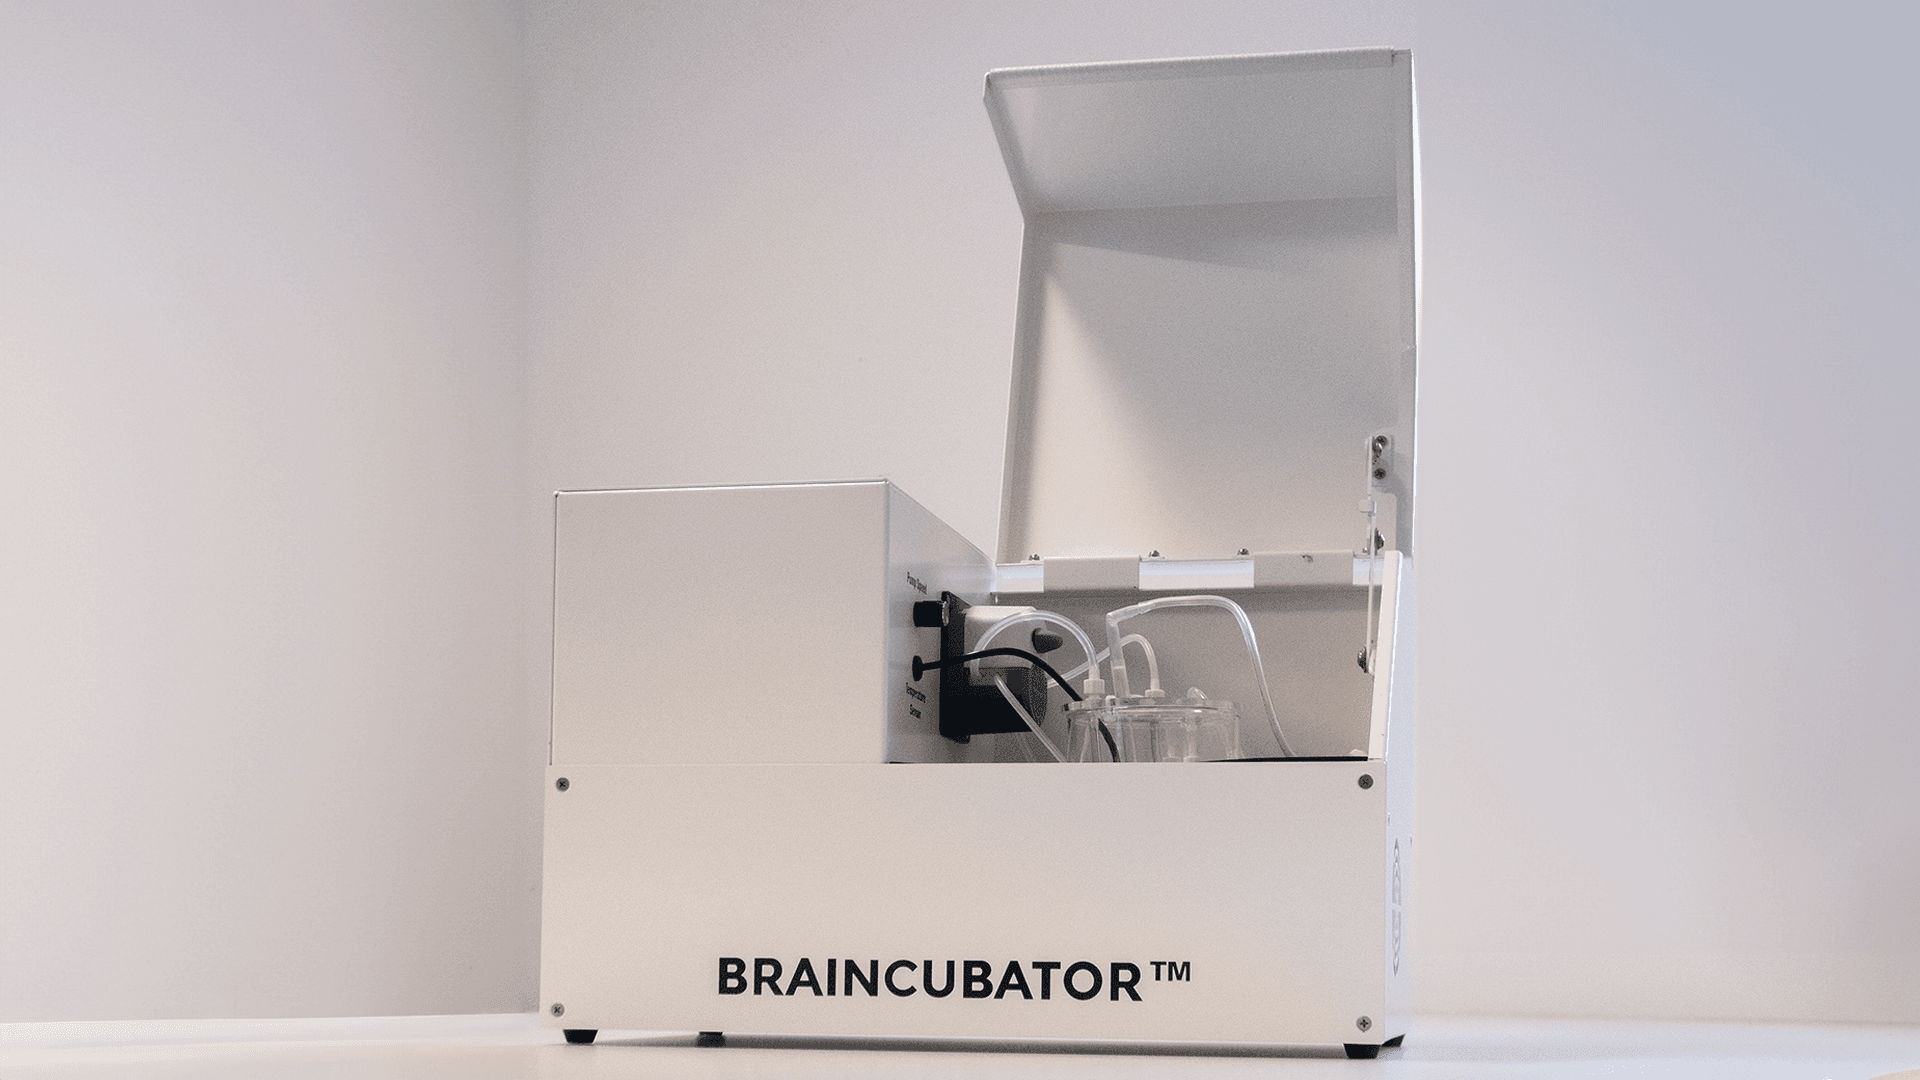 Incubation system extends the usable study time of a brain slice by 300%